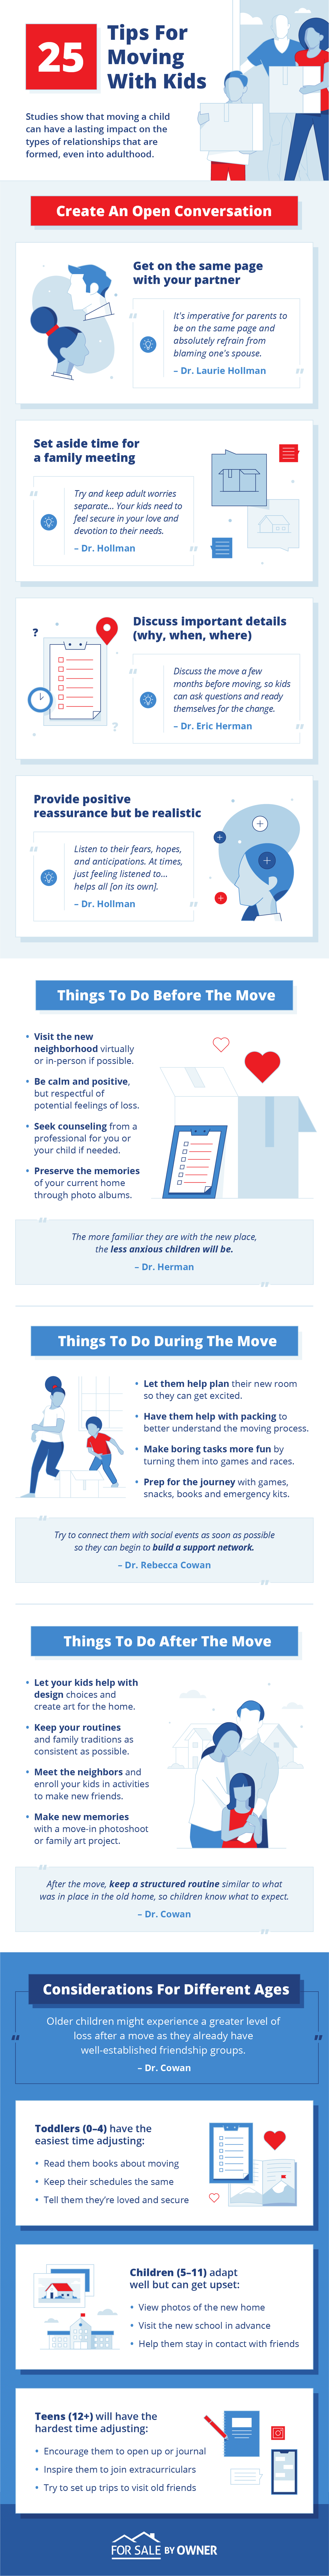 tips to move with children